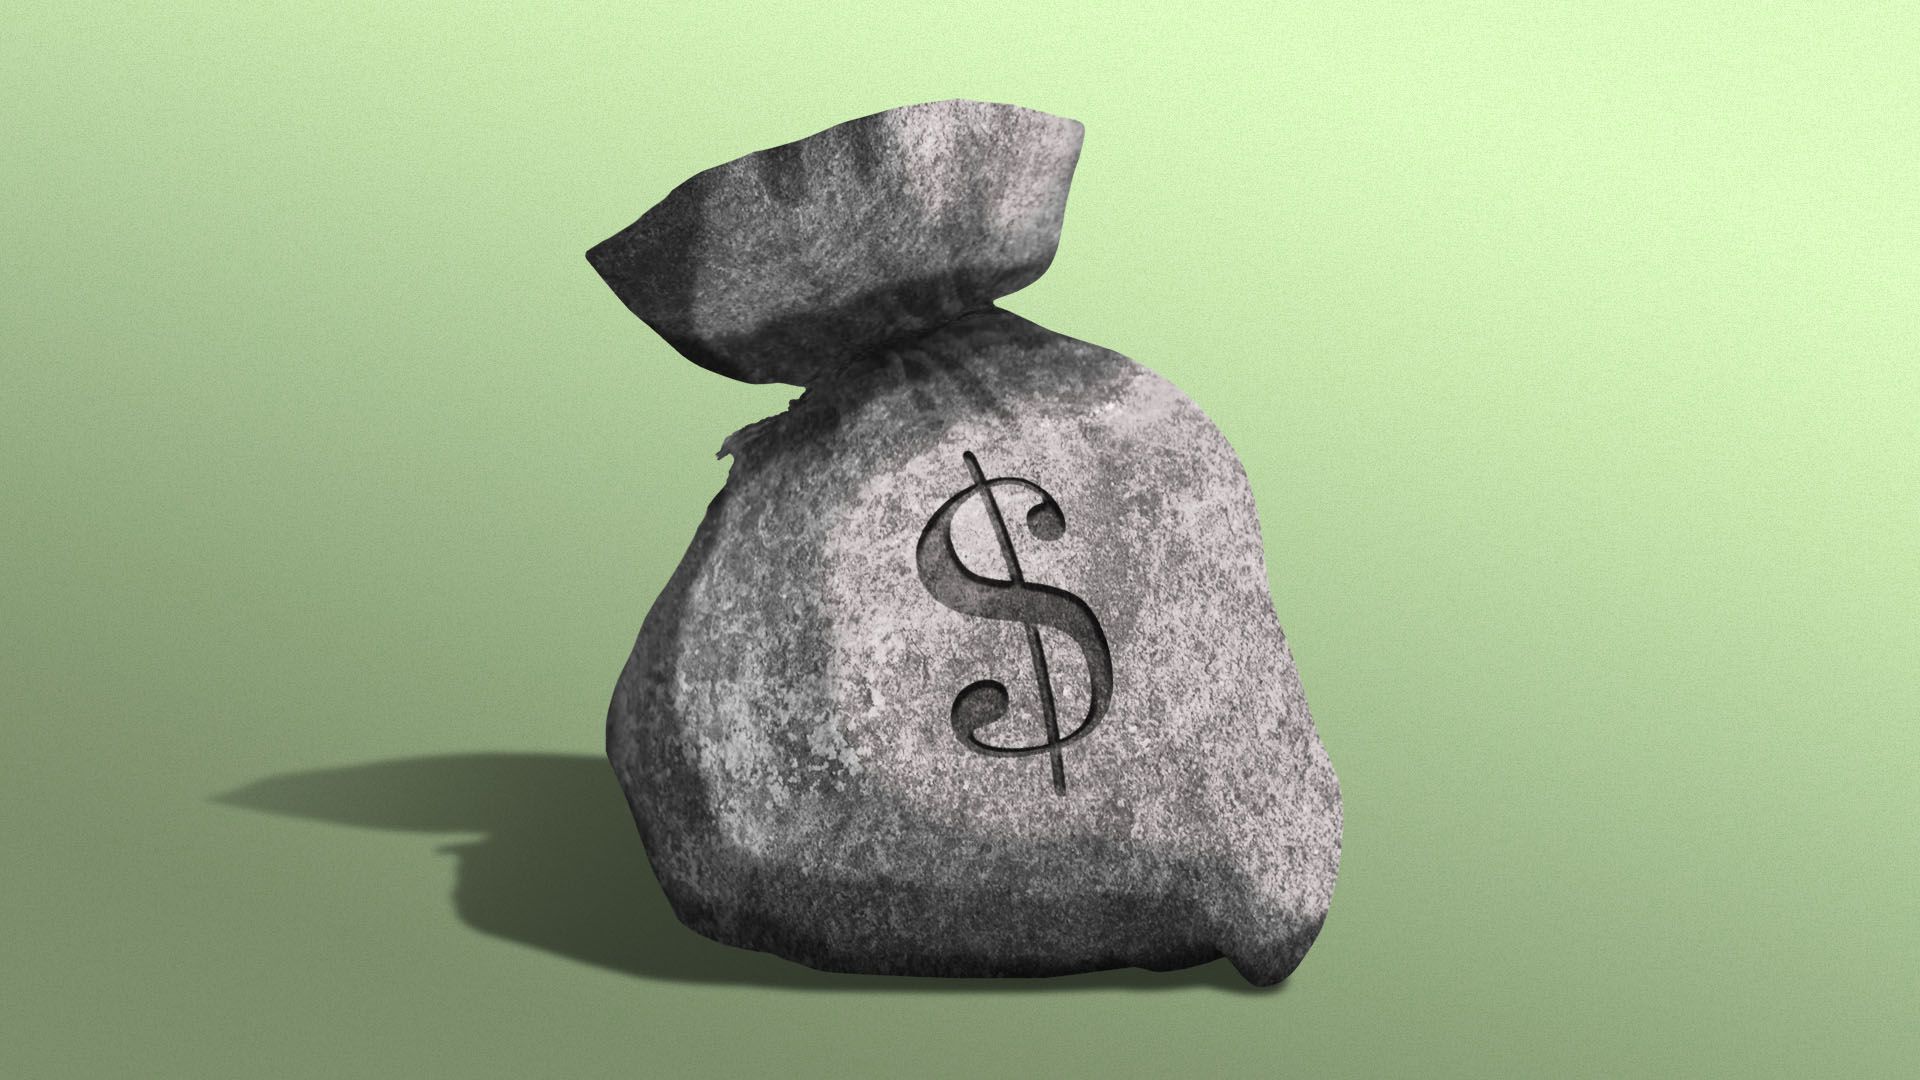 Illustration of a piece of concrete in the shape of a bag of money.